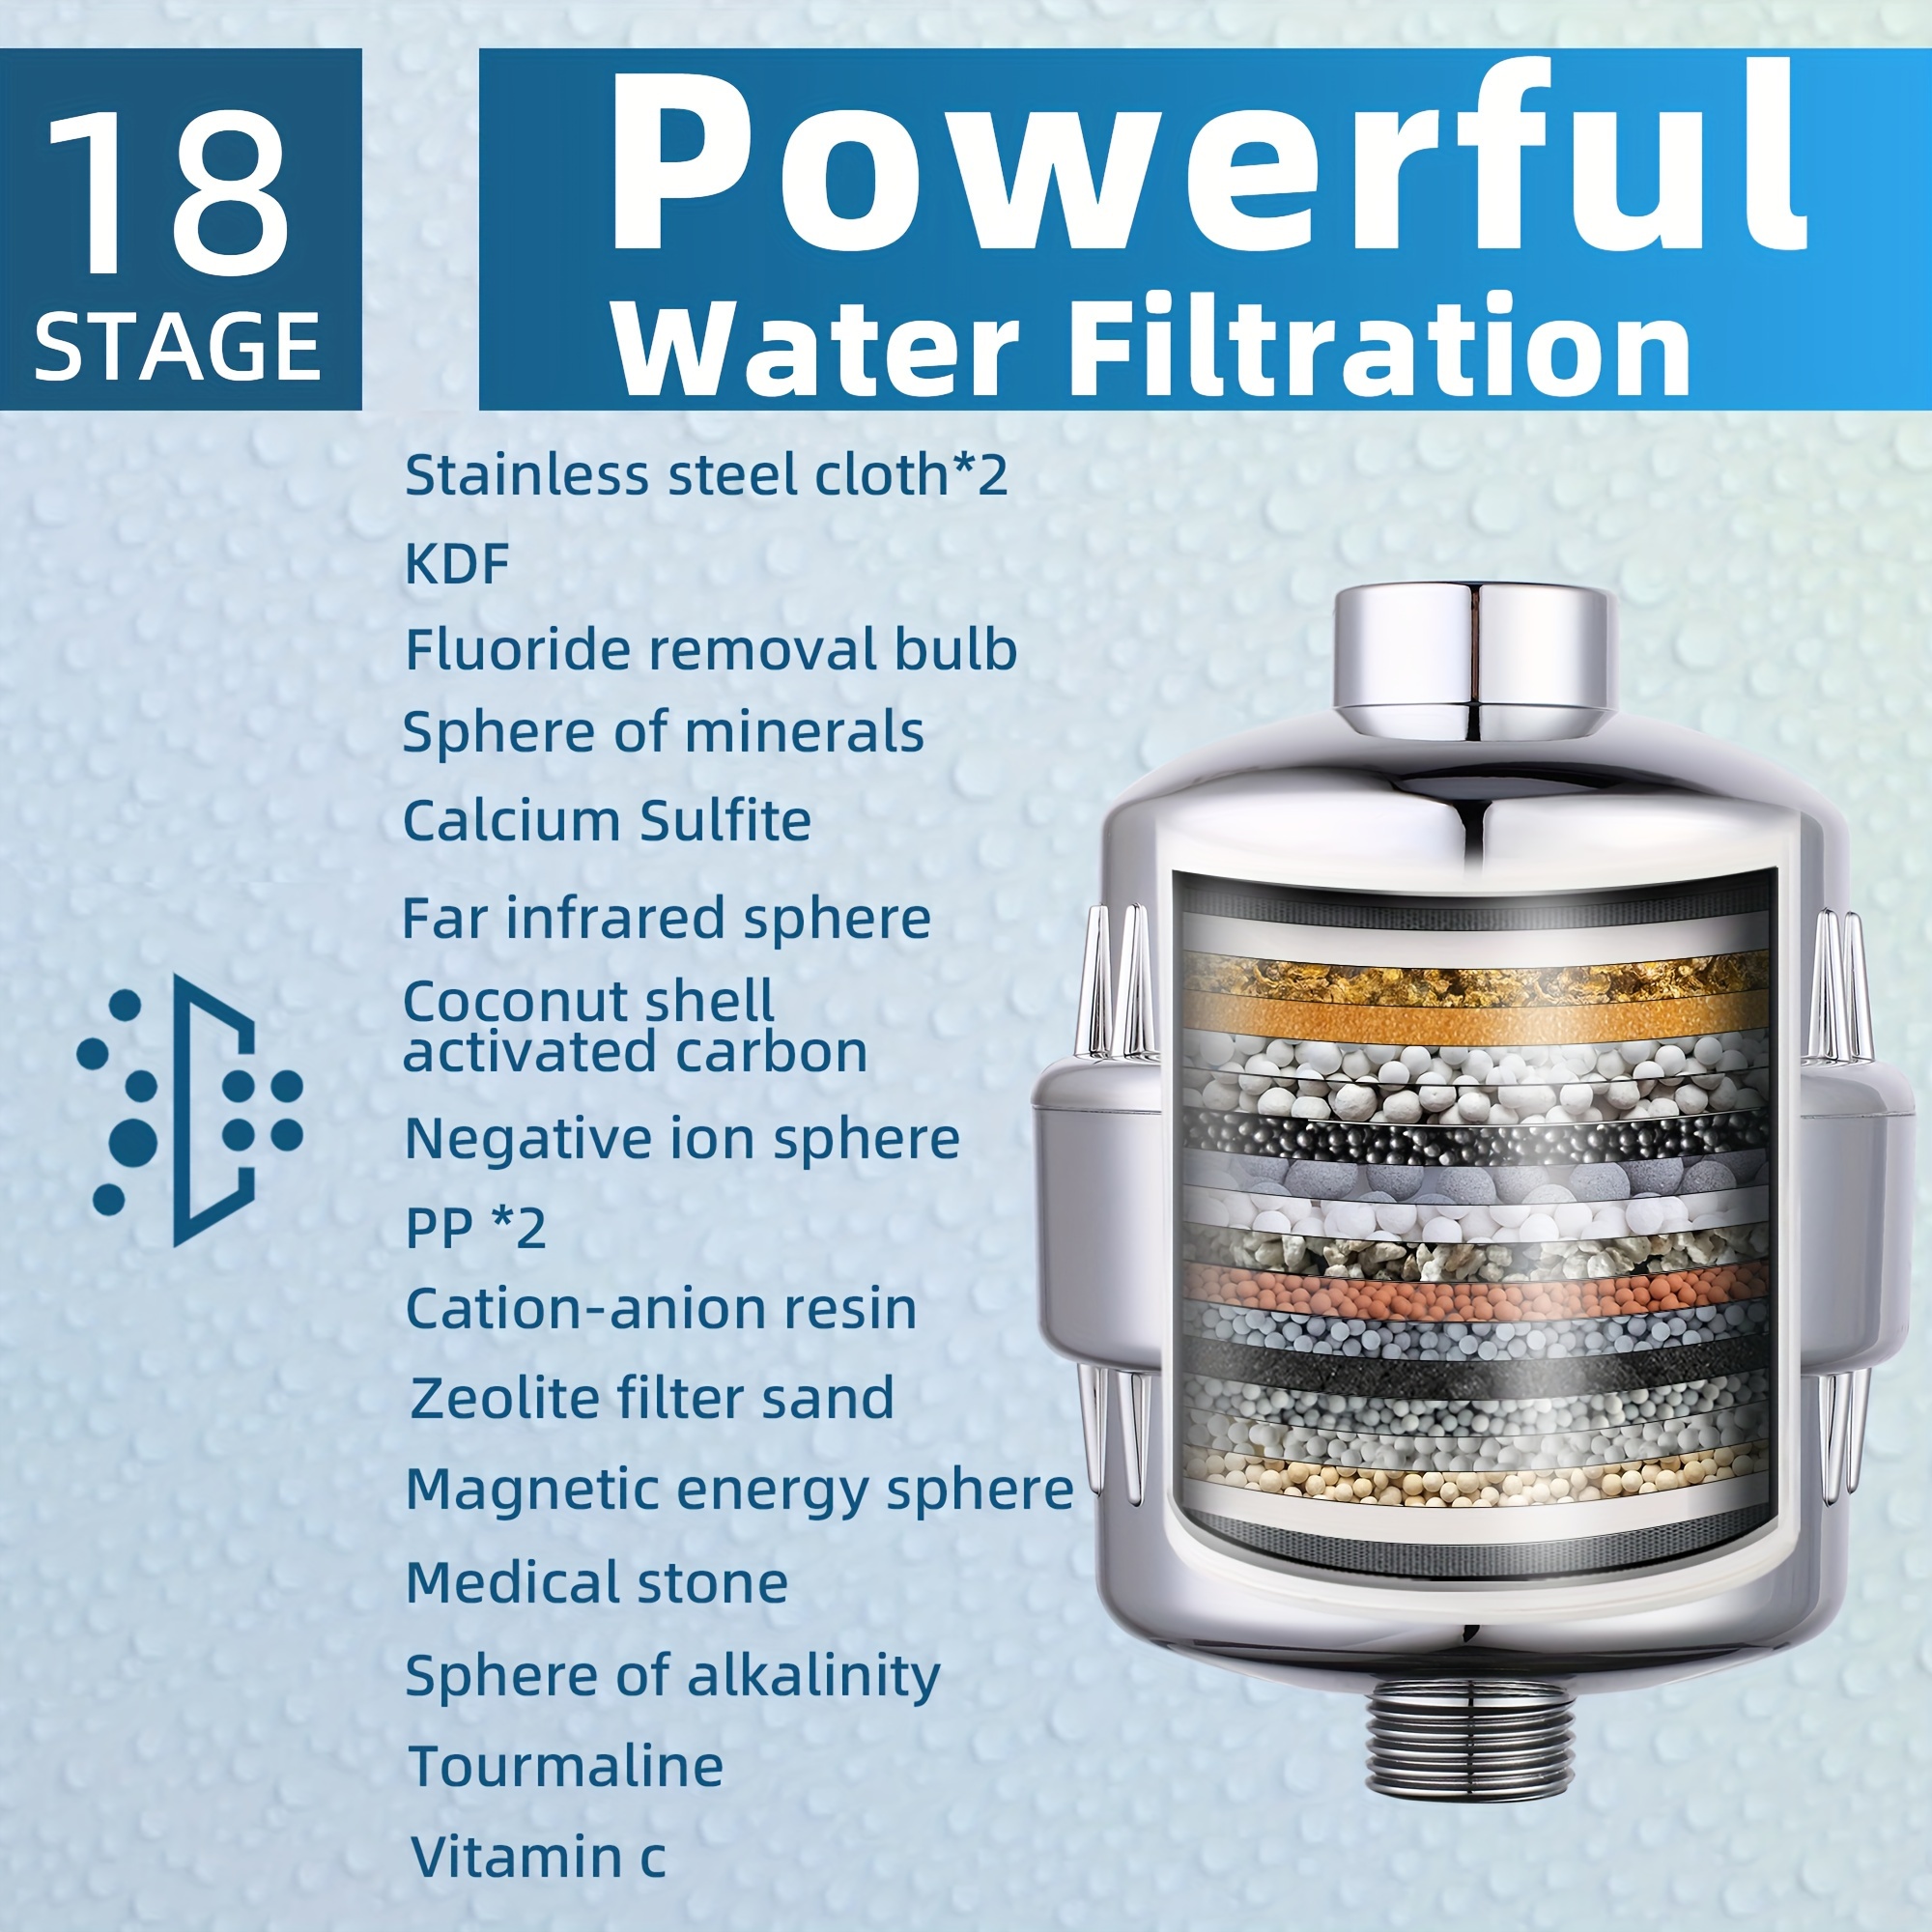 15 Stage Shower Head Filter Purifier with Filter for Hard Water Softener